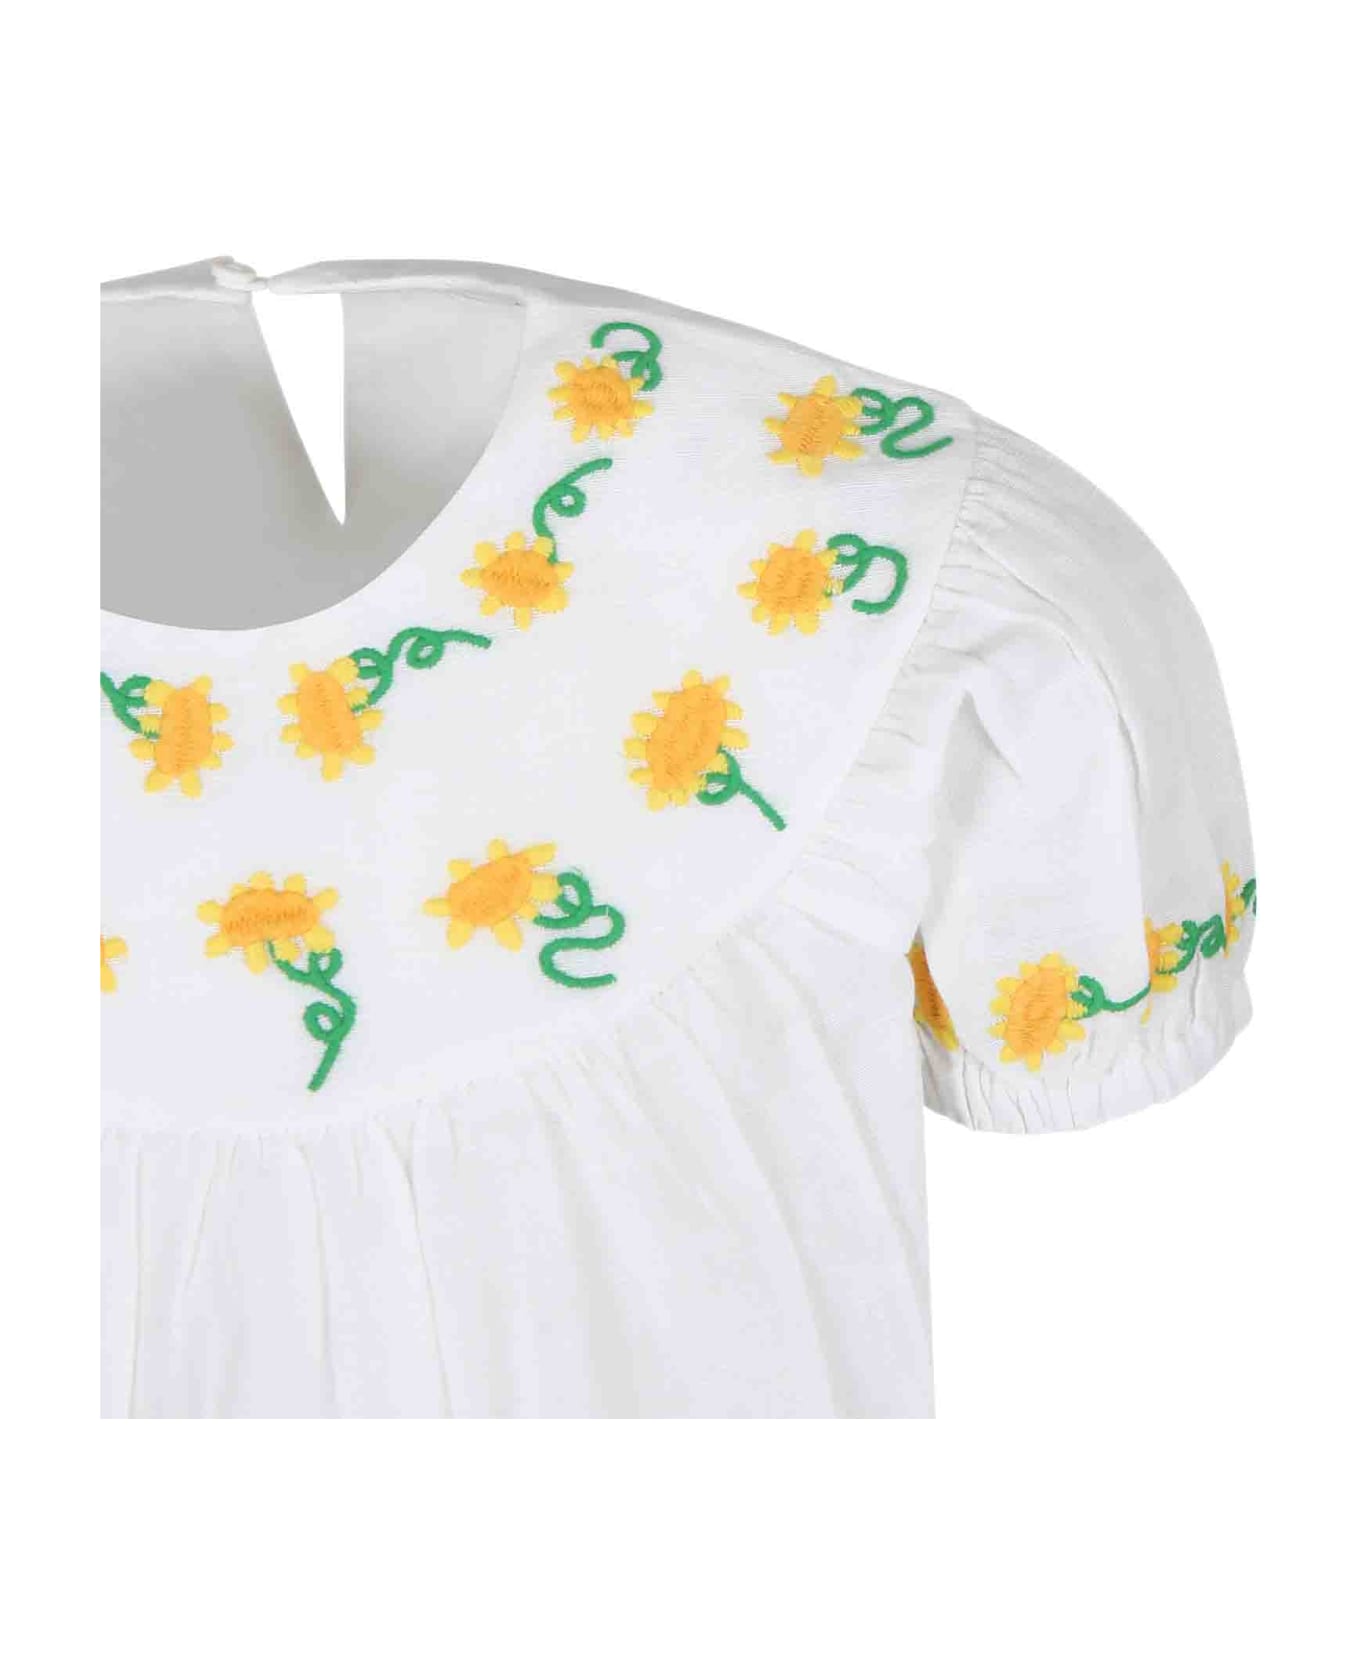 Stella McCartney Kids White Top For Girl With Embroidered Sunflowers - White